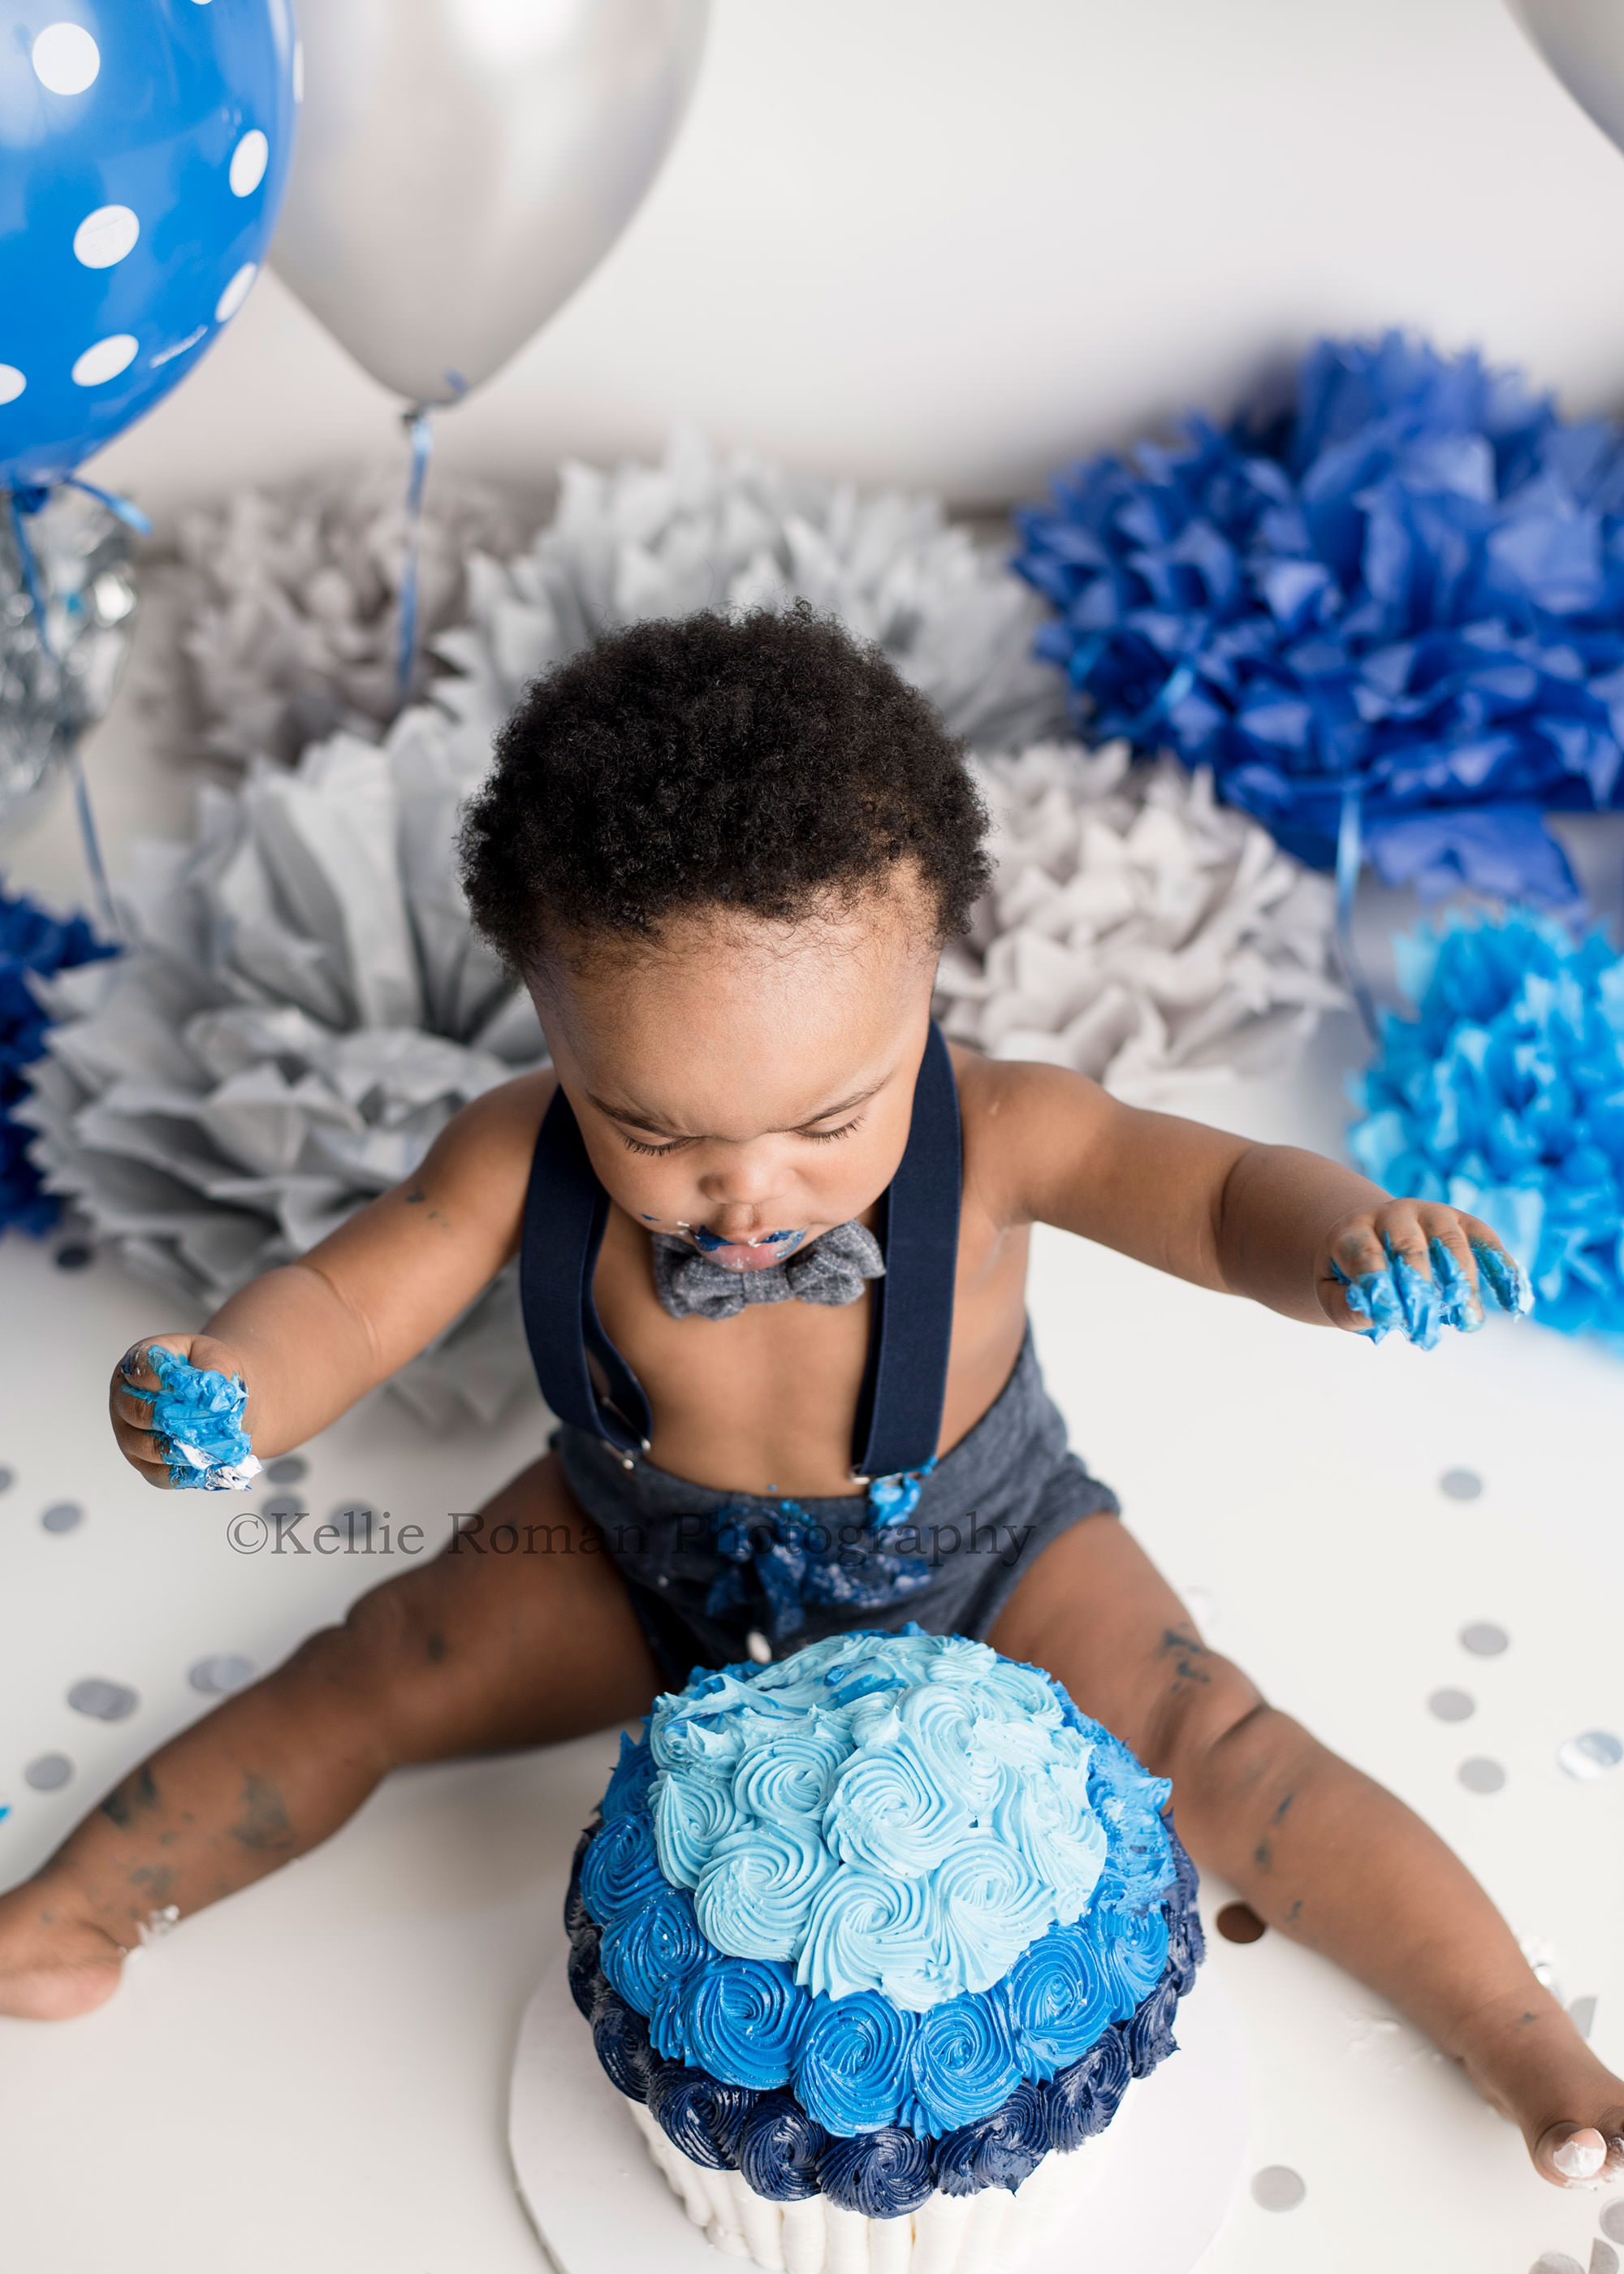 shades of blue cake smash one year old boy in a Milwaukee Wisconsins photographers studio he's sitting behind a blue and white back and has suspenders and a bow tie on he's surrounded by blue balloons